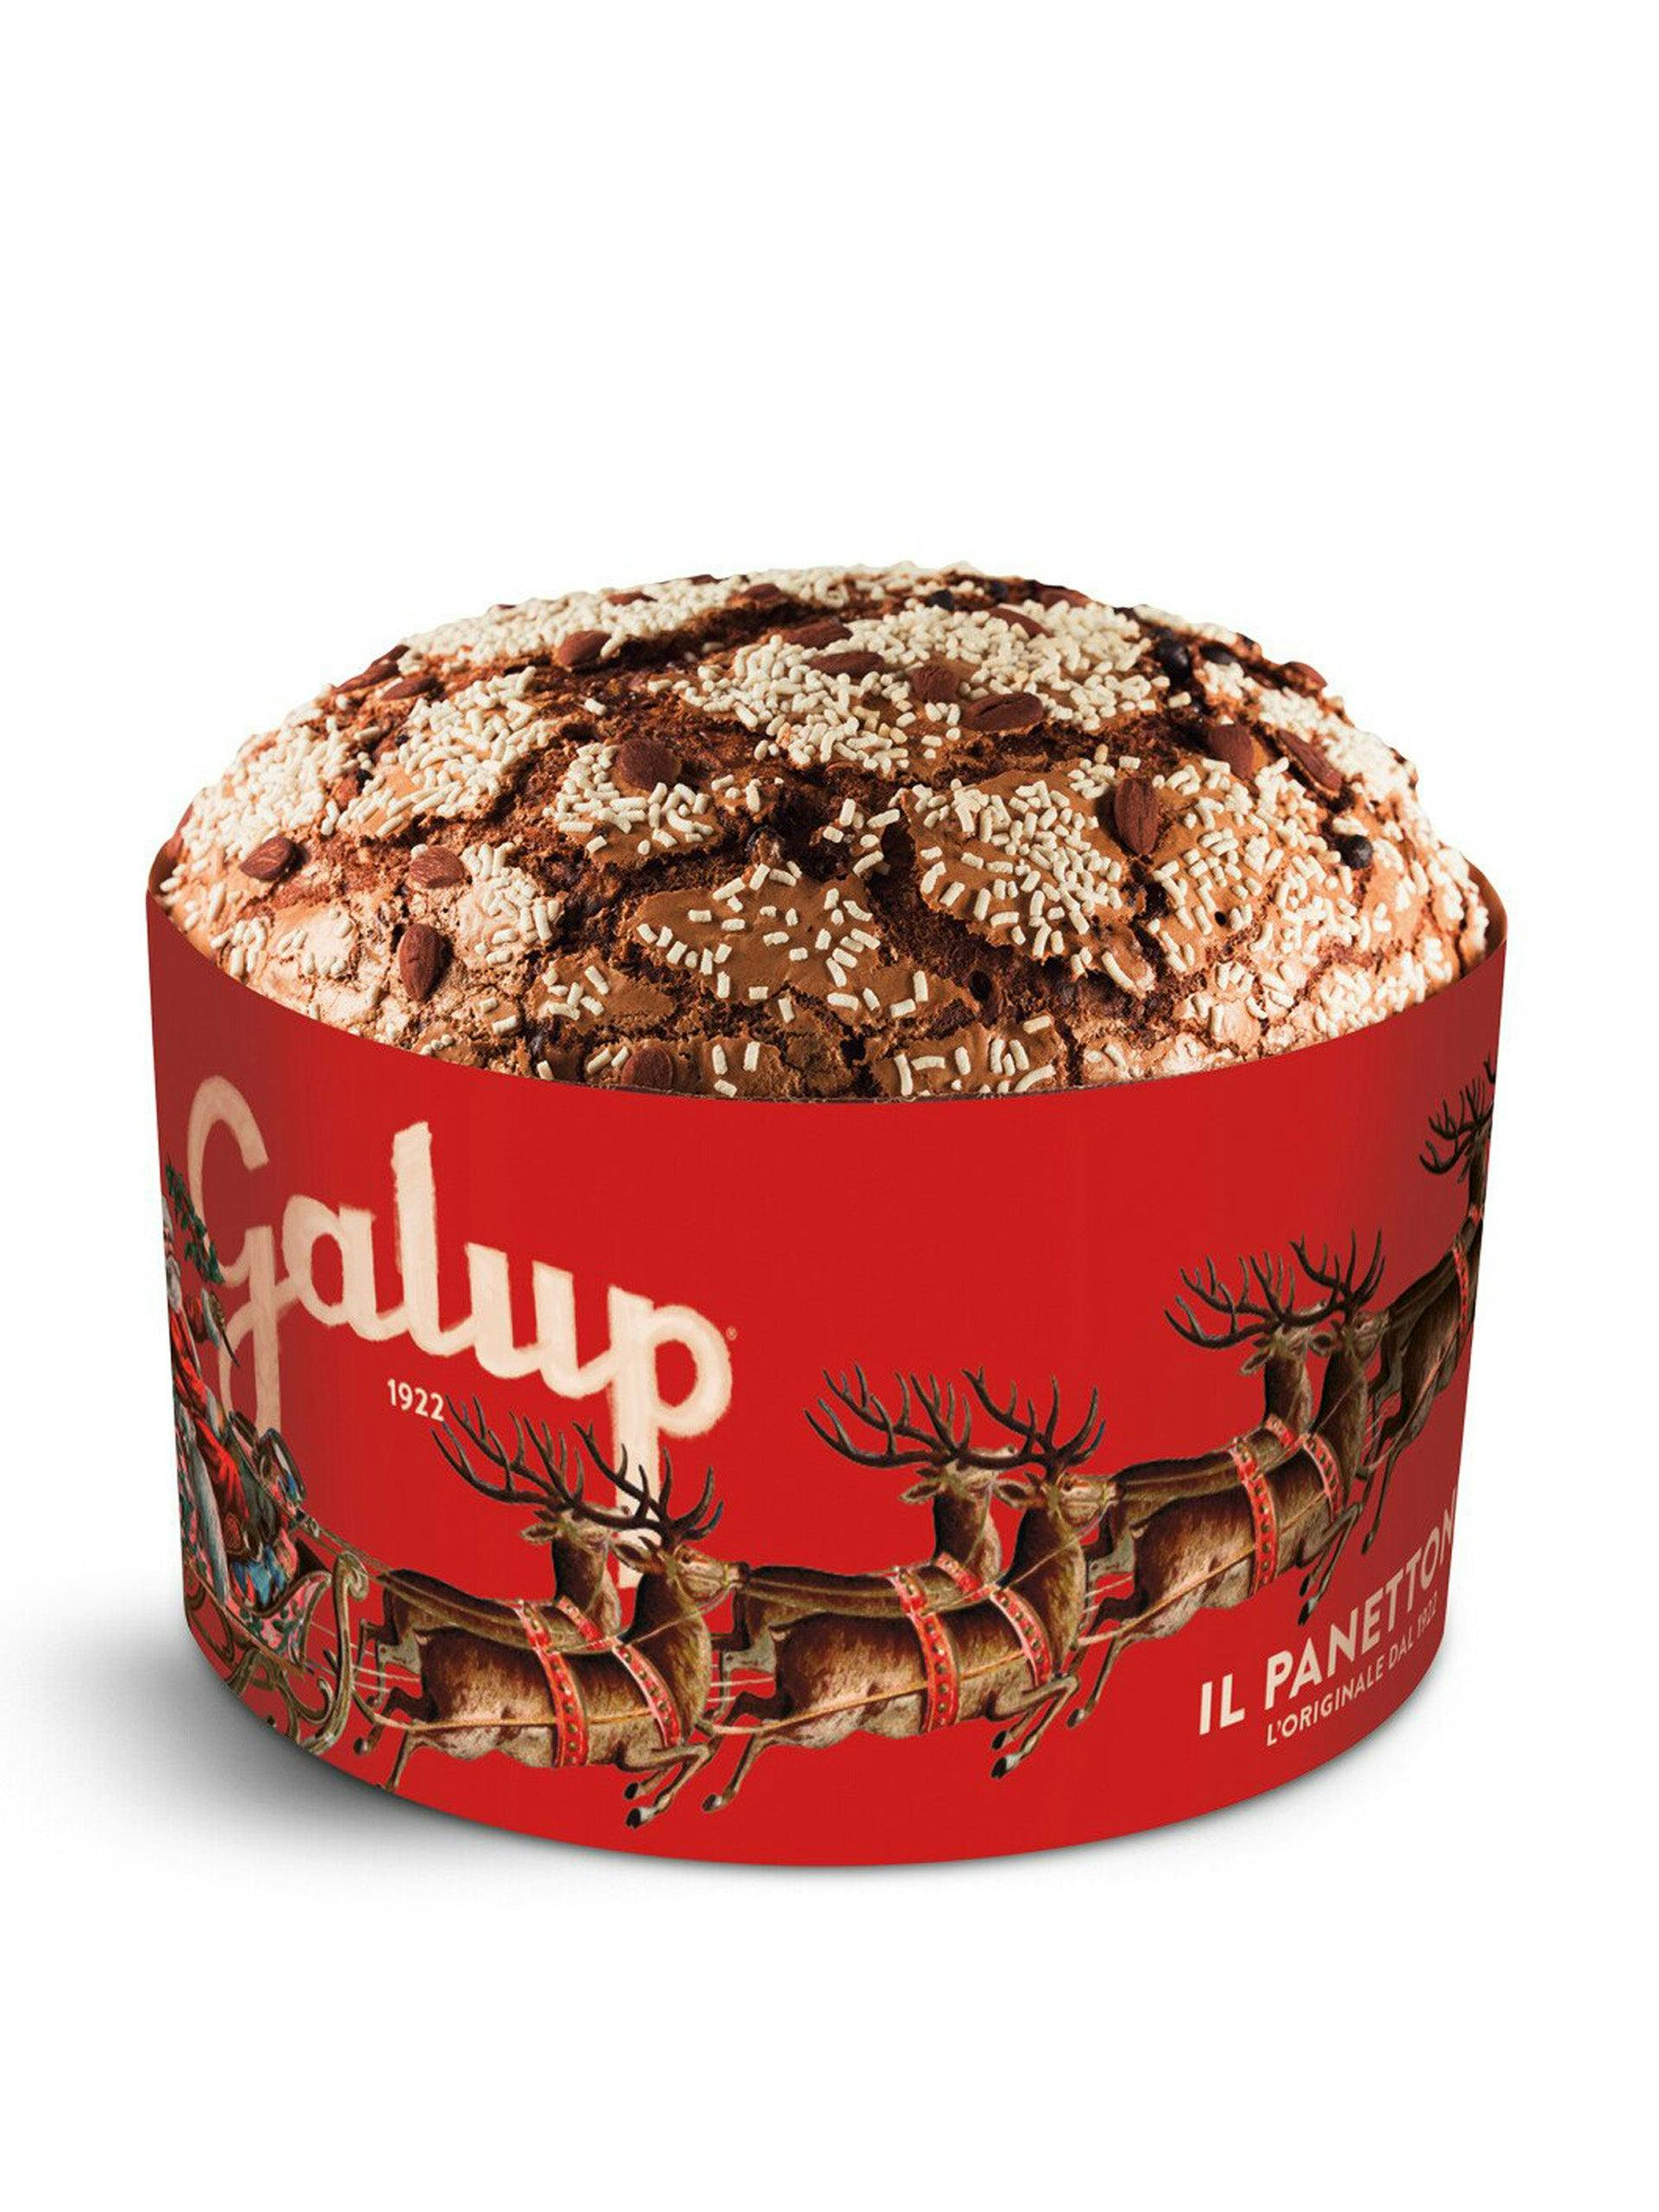 Galup Christmas Edition Traditional Panettone round tin